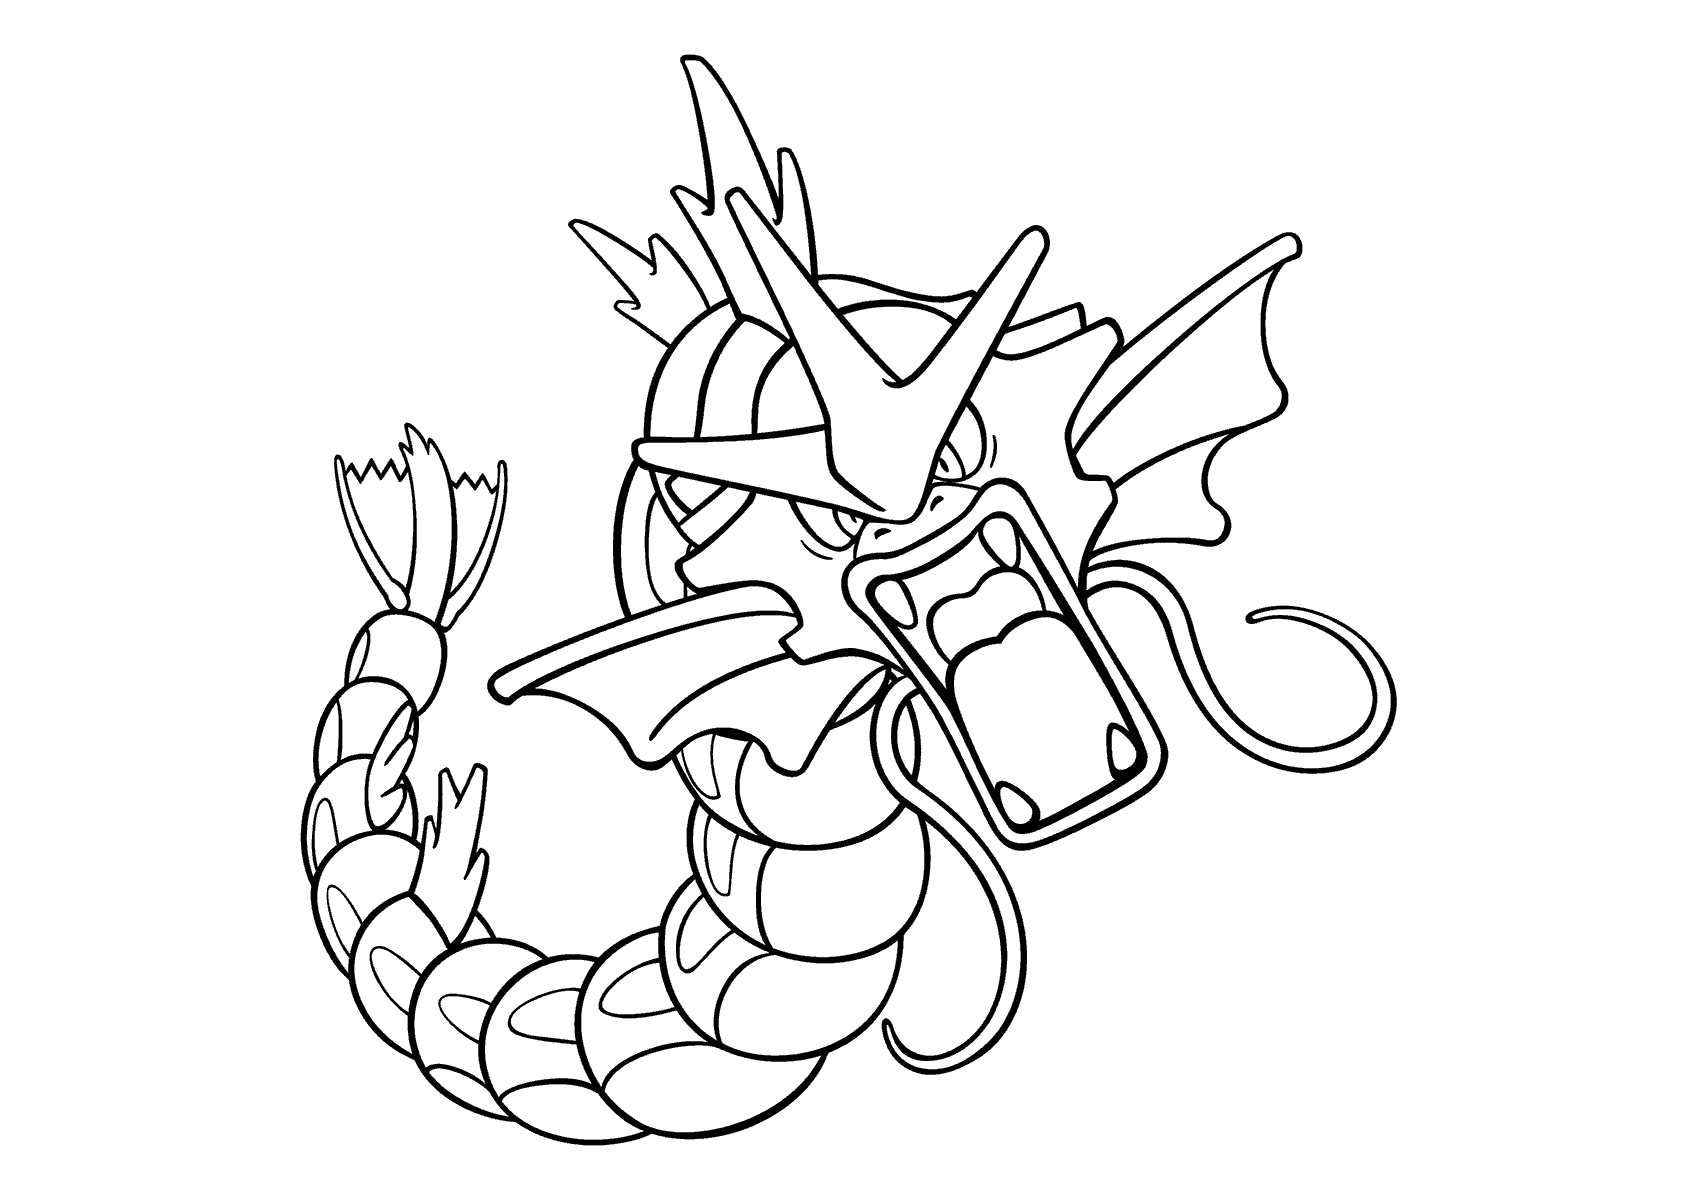 coloring page: Big, dragon-like Pokémon w/long billowing fins, snaky body, sharp teeth & red eyes.